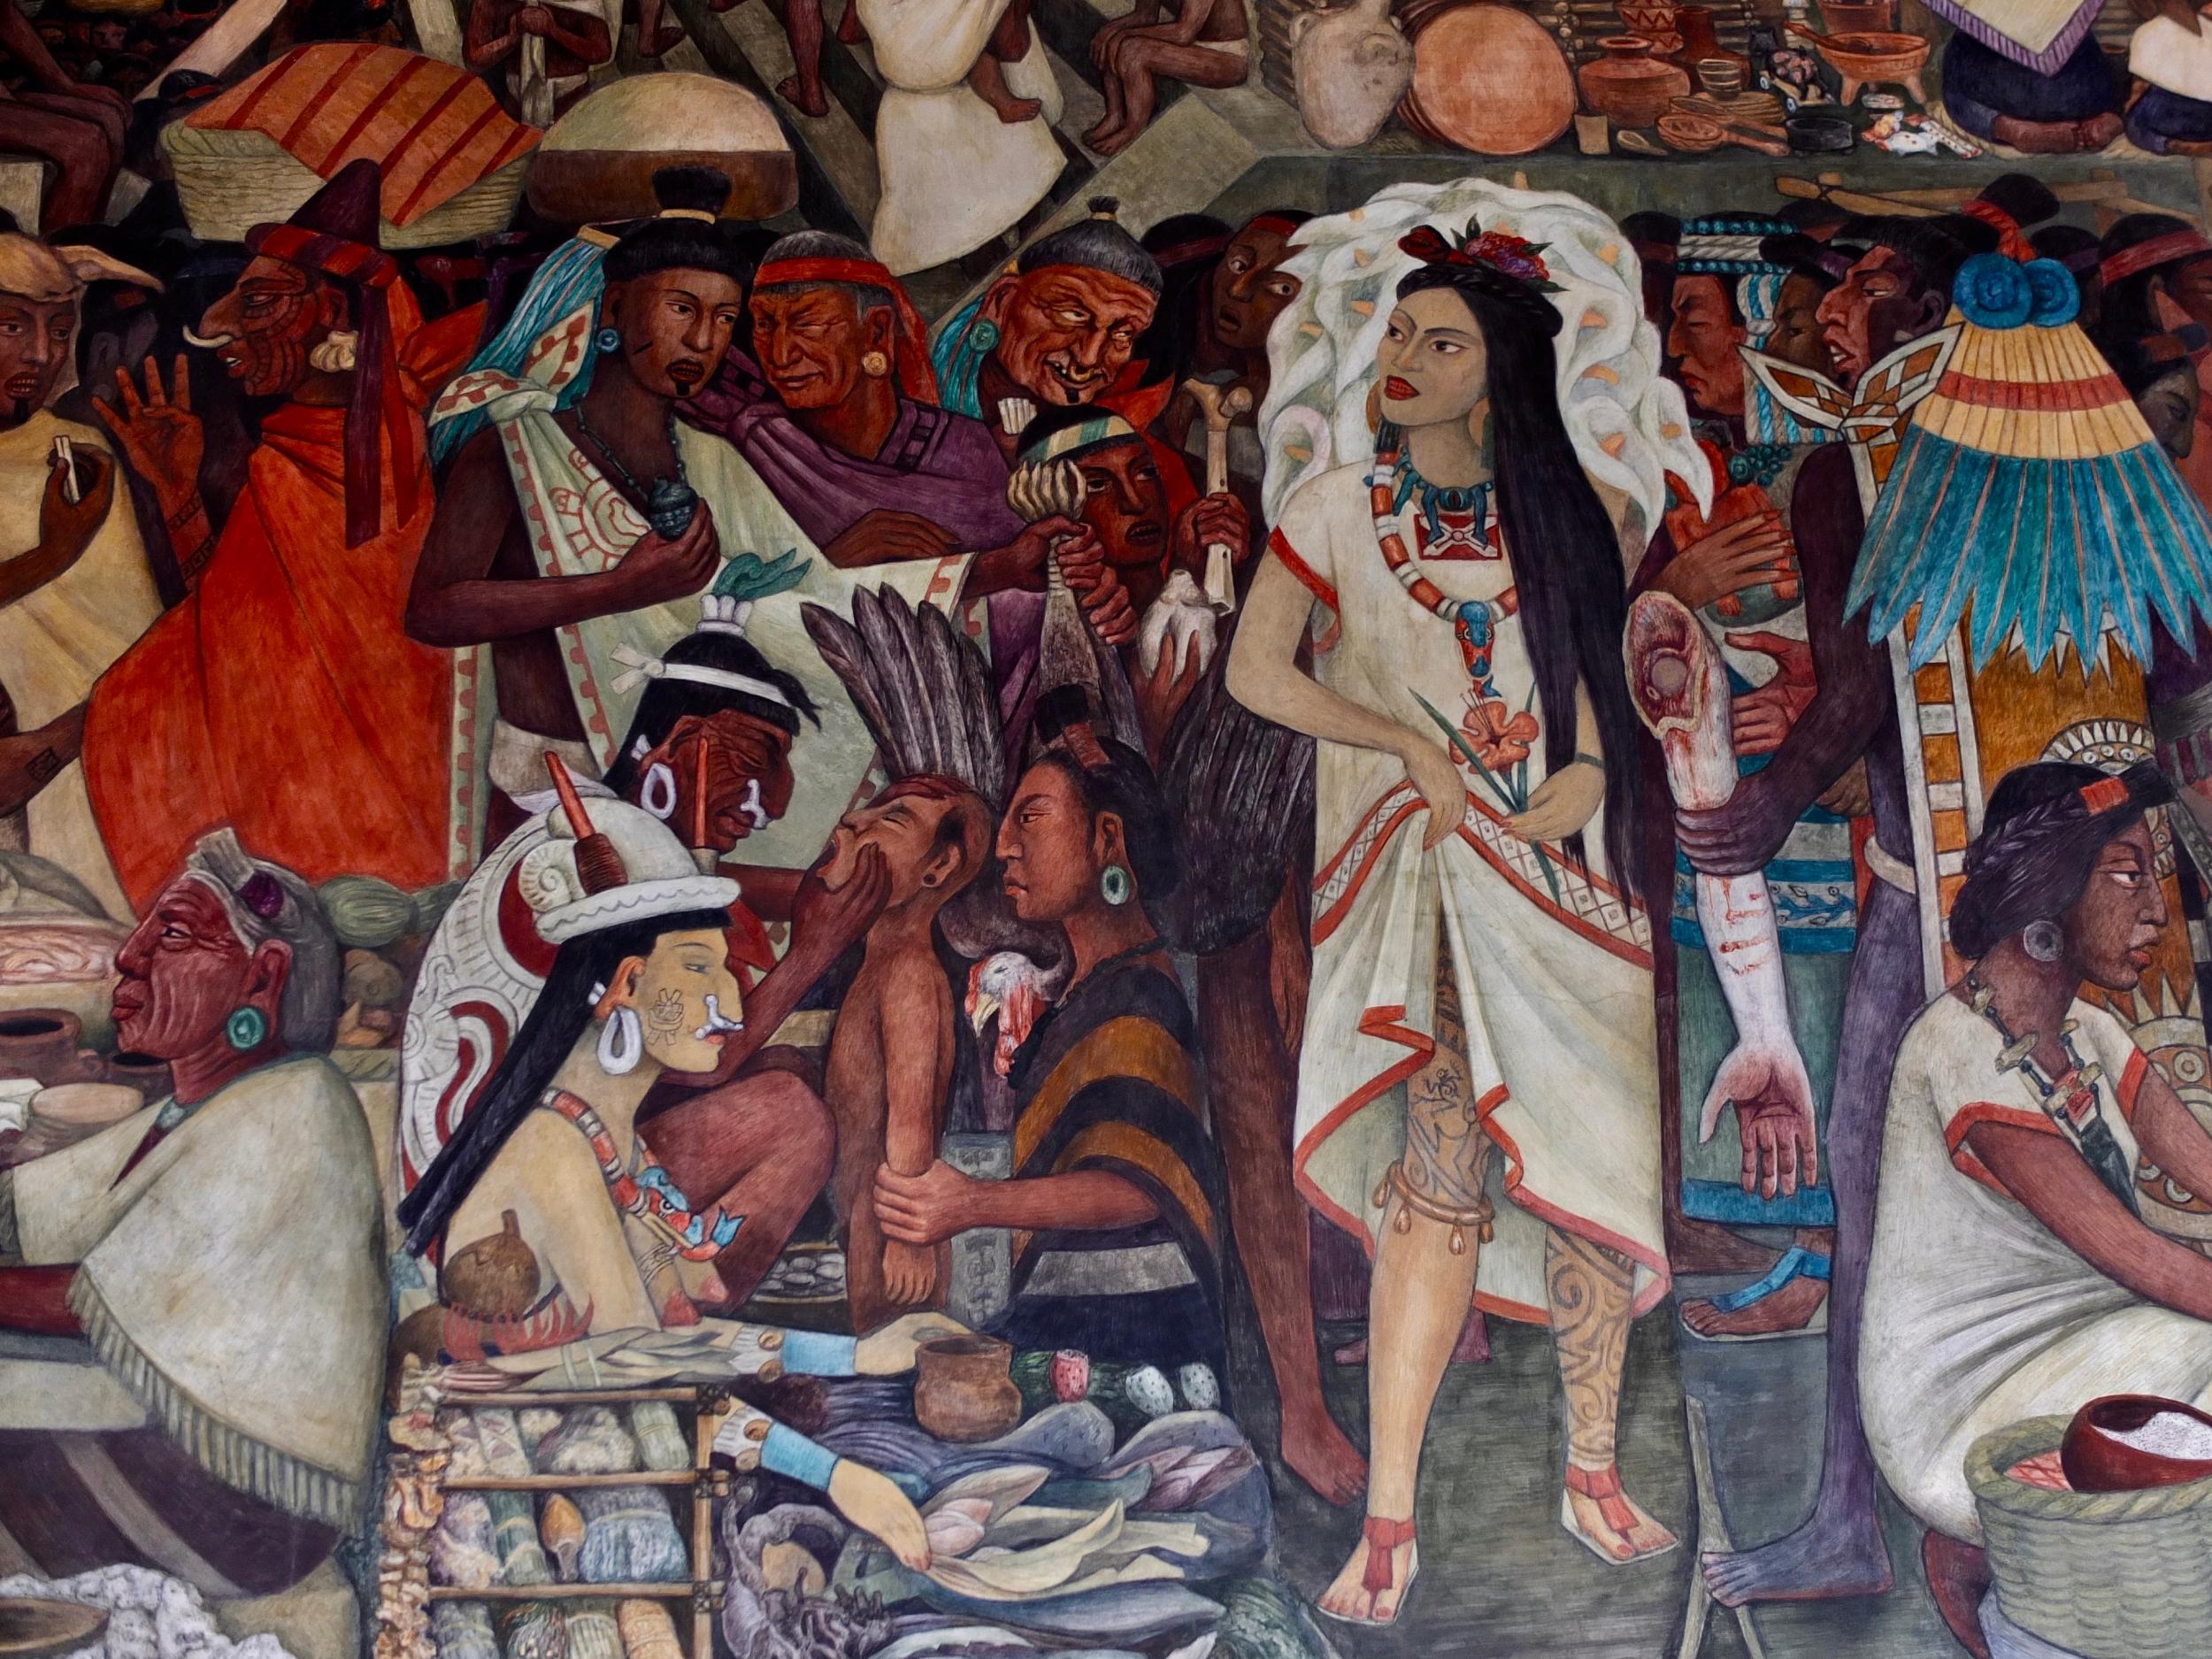 Frida appears in murals as an Aztec princess